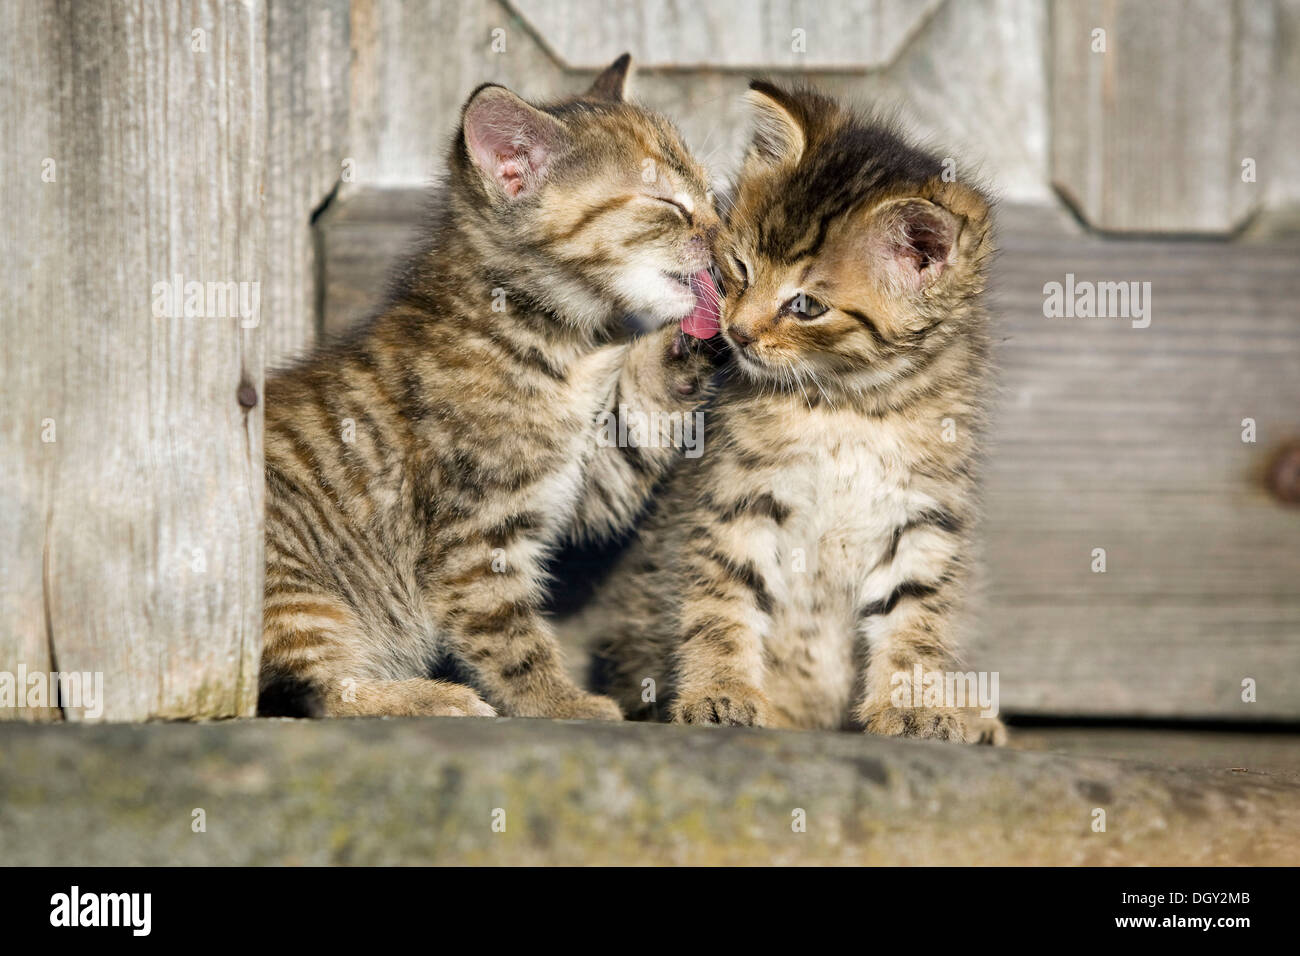 2 brown tabby kittens sitting in front of a wooden door and grooming each other, Satteldorf, Hohenlohe, Baden-Württemberg Stock Photo